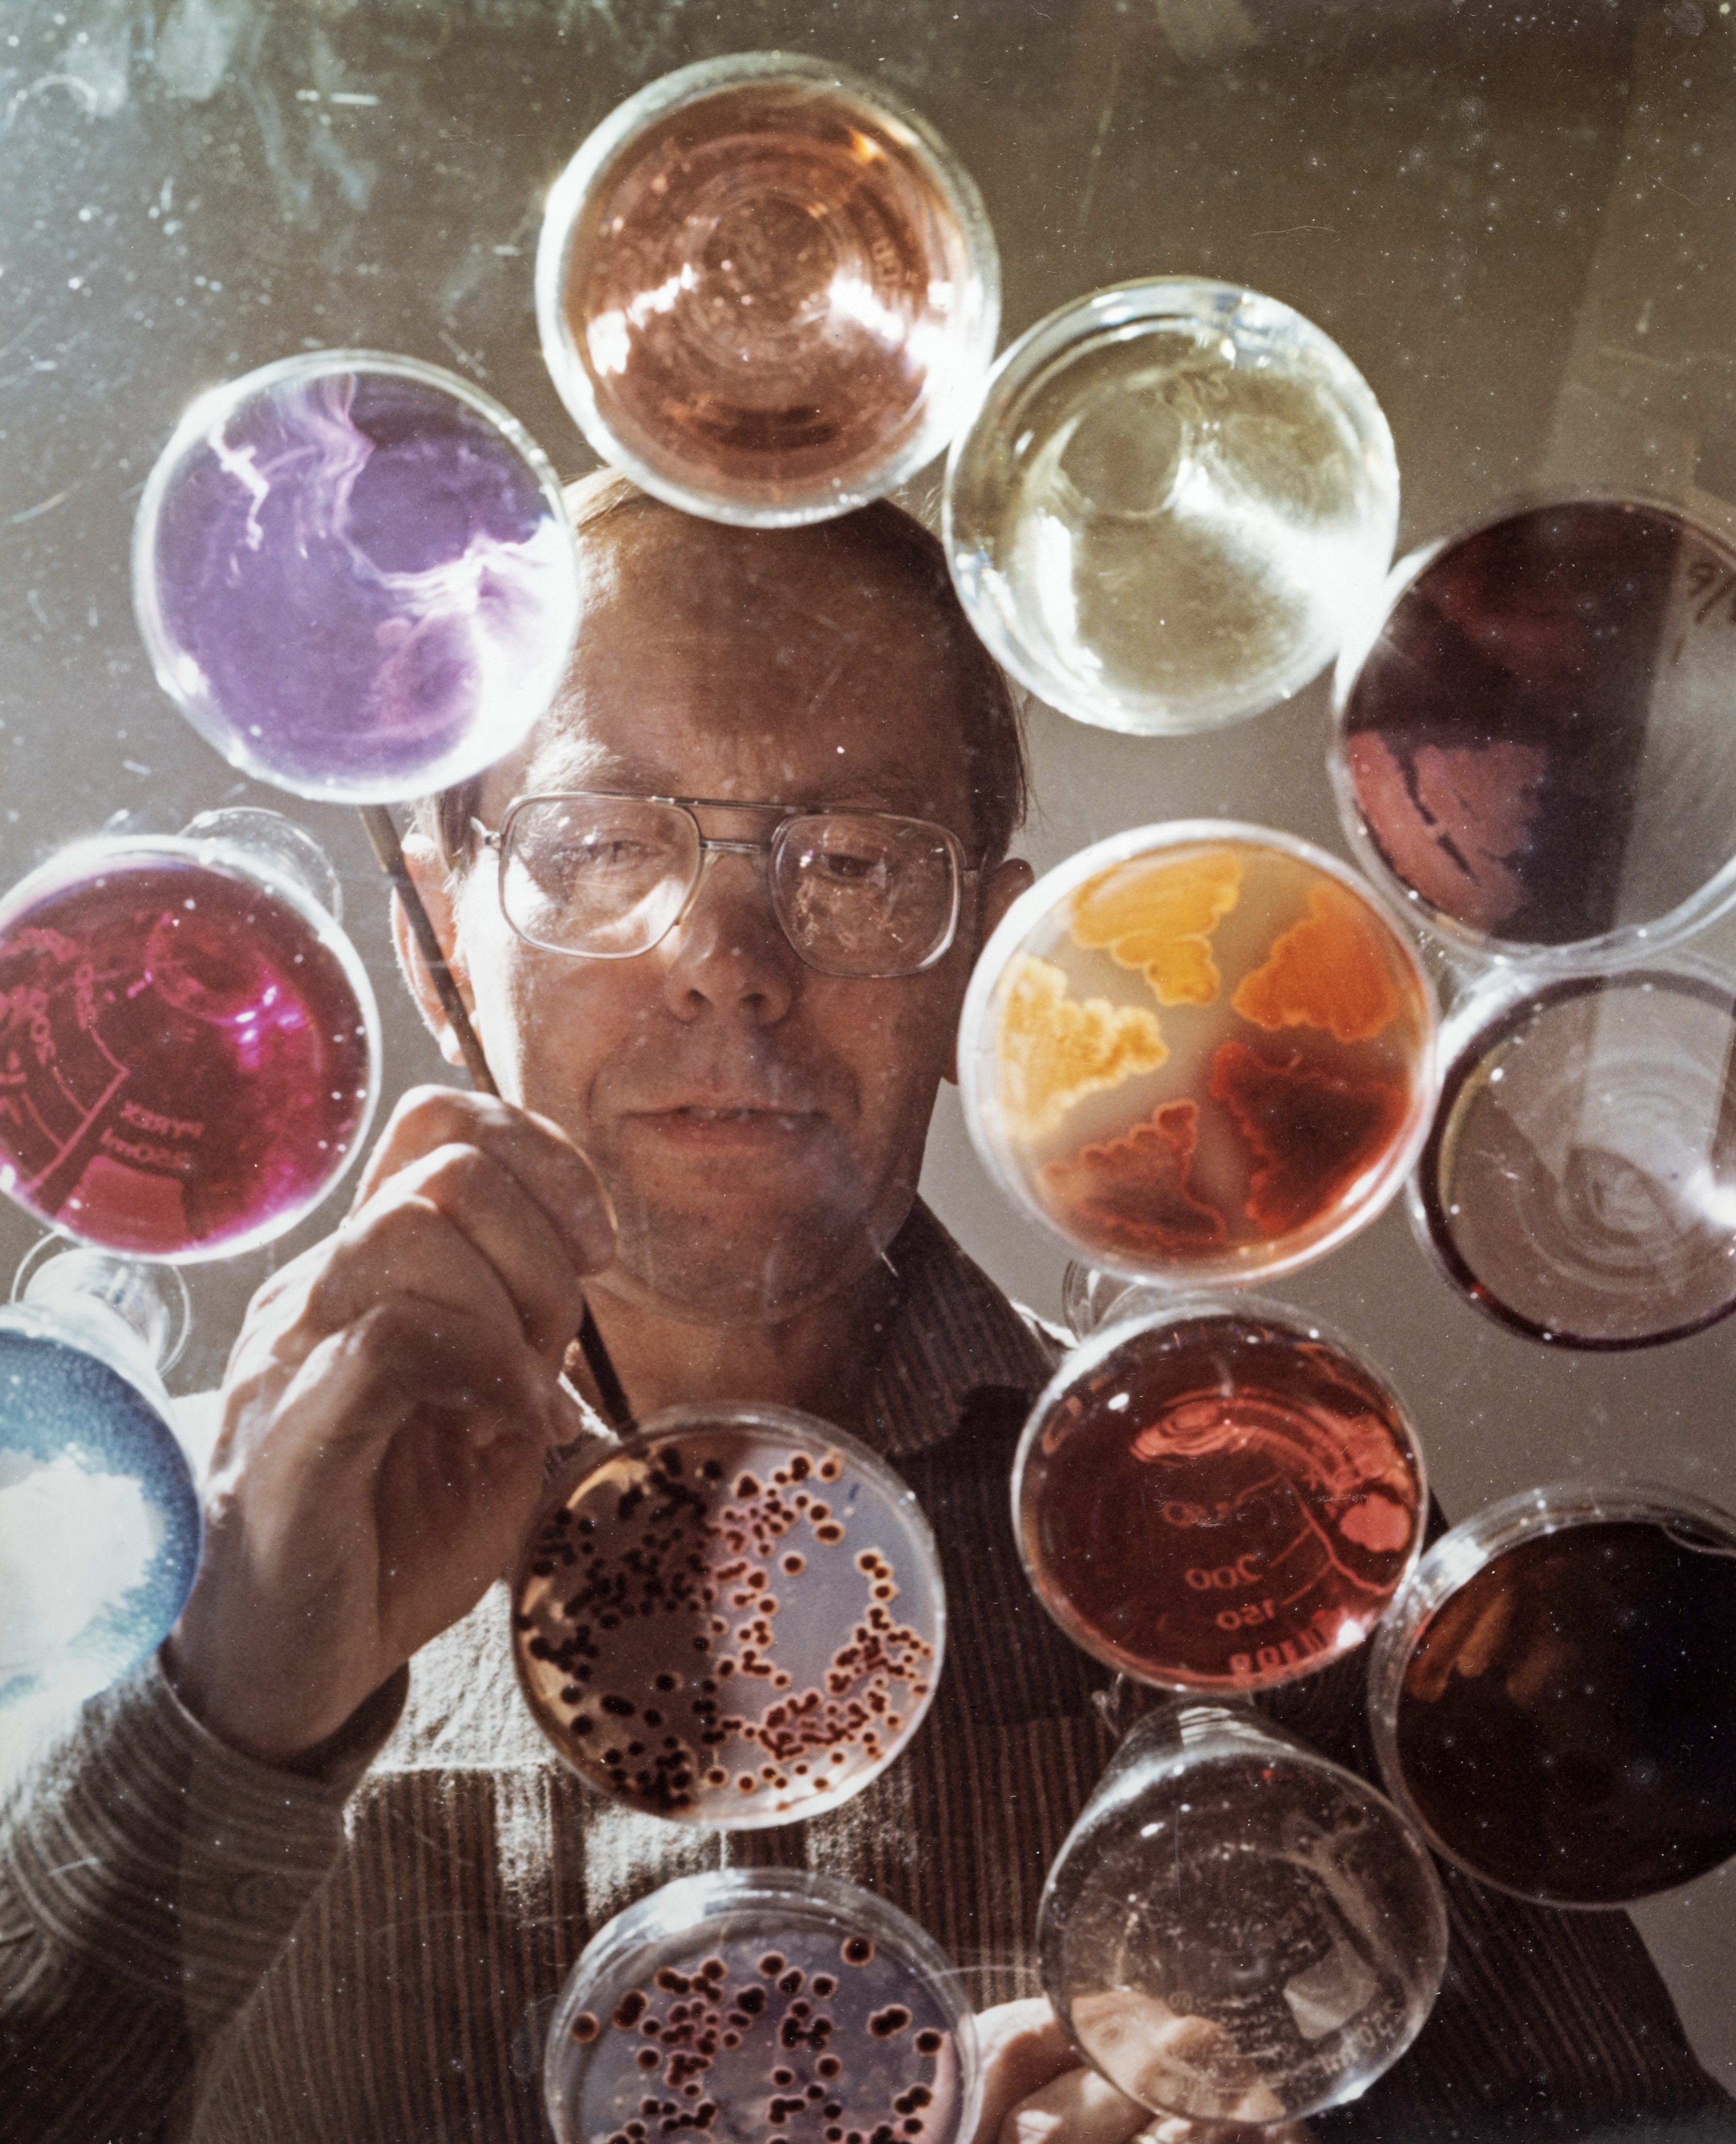 Looking up through colourful petri dishes at a man's face holding a stick